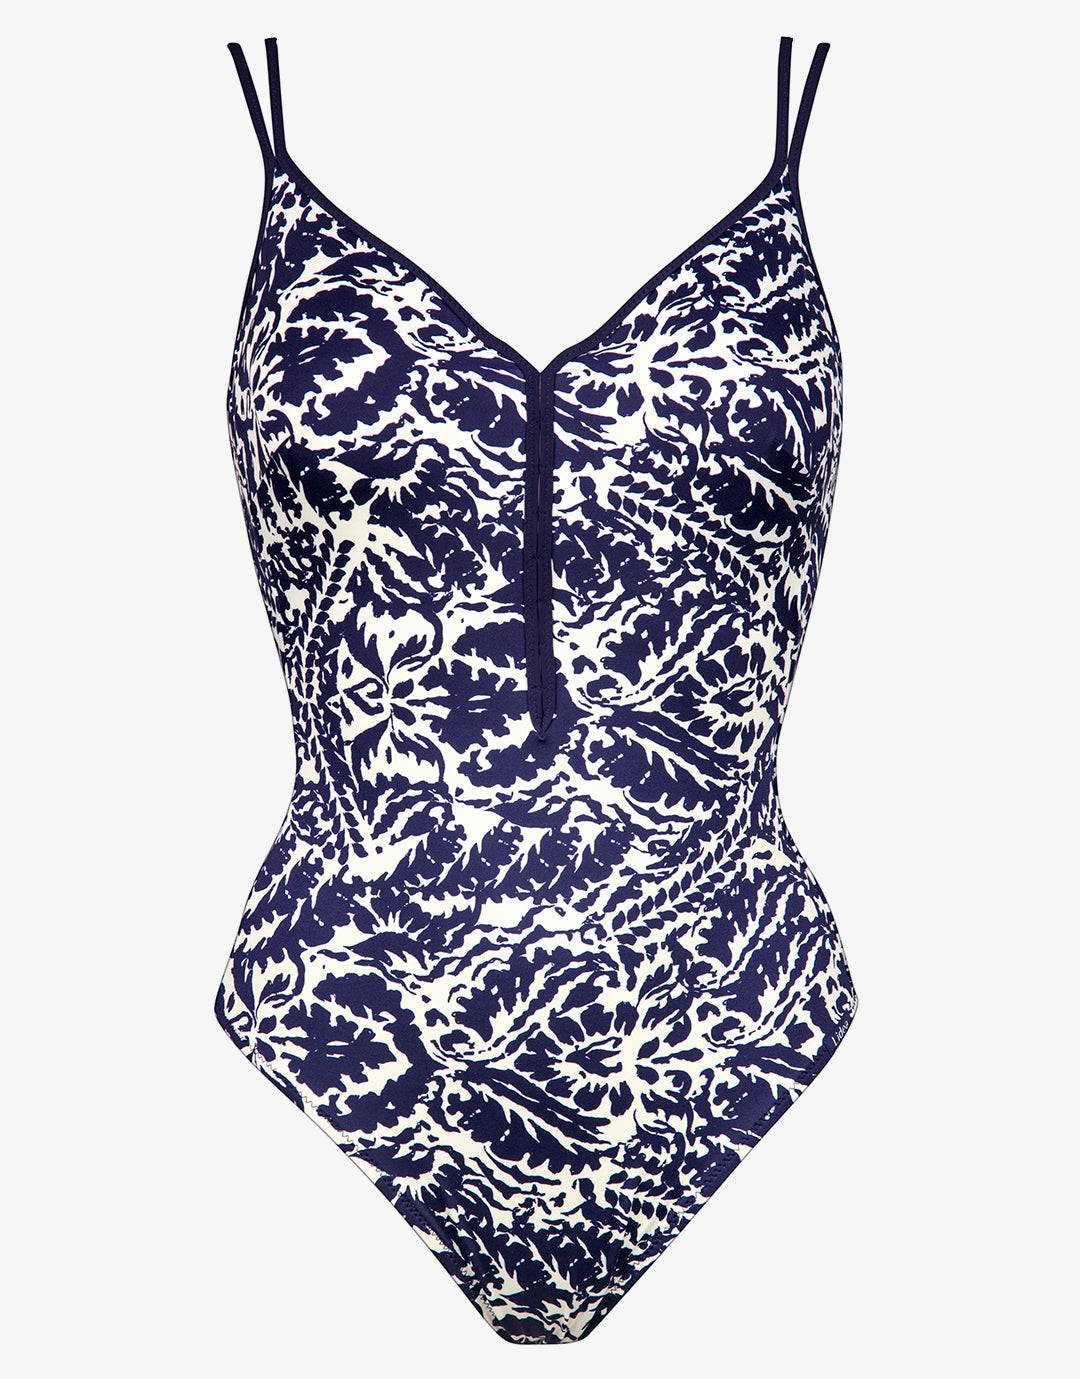 Arabesque Mood Underwired Swimsuit - Canvas Blue - Simply Beach UK